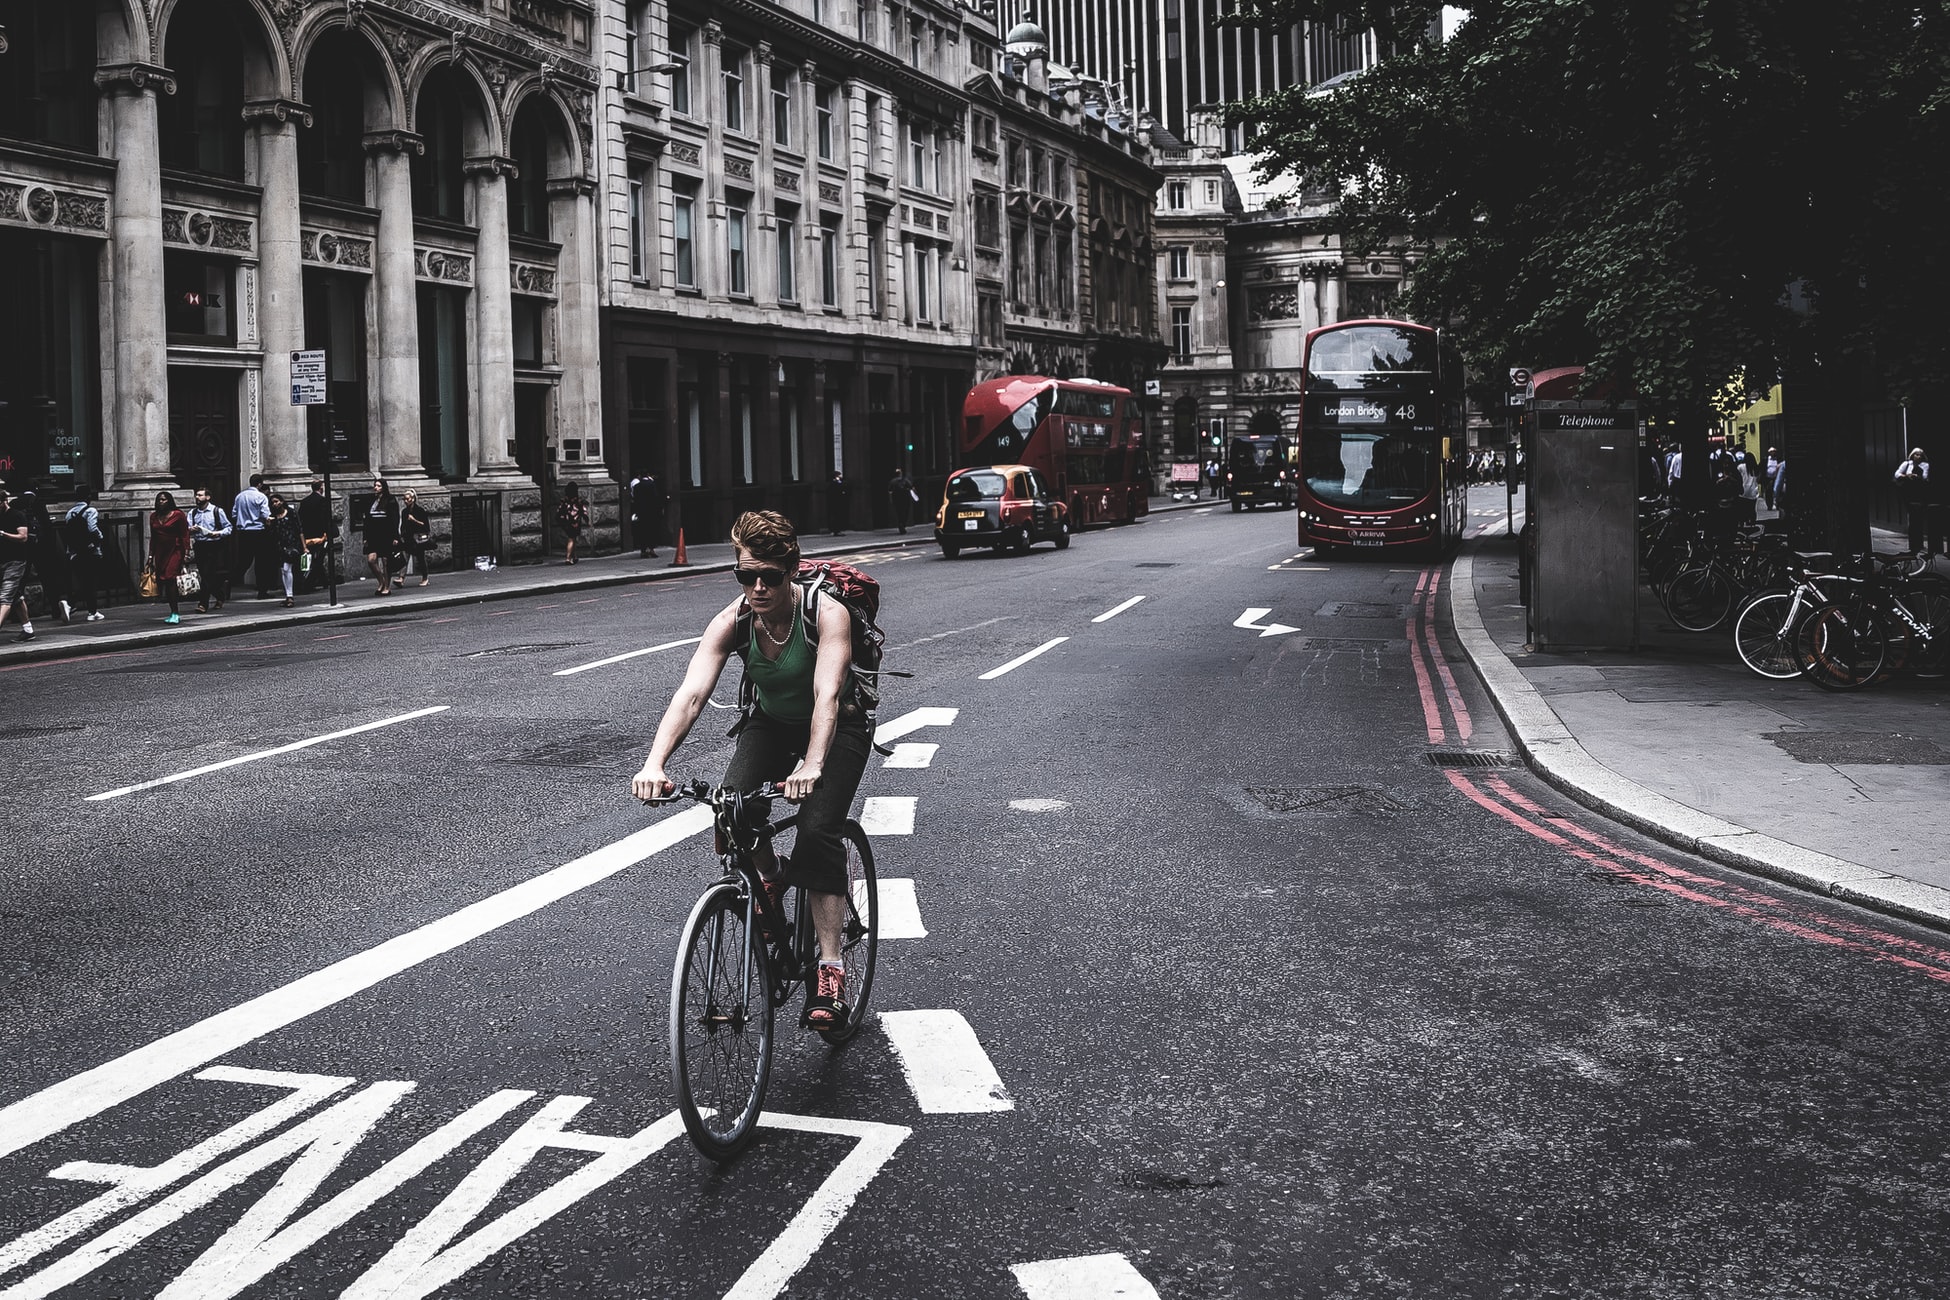 “Many Londoners have rediscovered the joys of walking and cycling during lockdown and, by quickly and cheaply widening pavements, creating temporary cycle lanes and closing roads to through traffic we will enable millions more people to change the way they get around our city,” said London’s mayor Sadiq Khan.